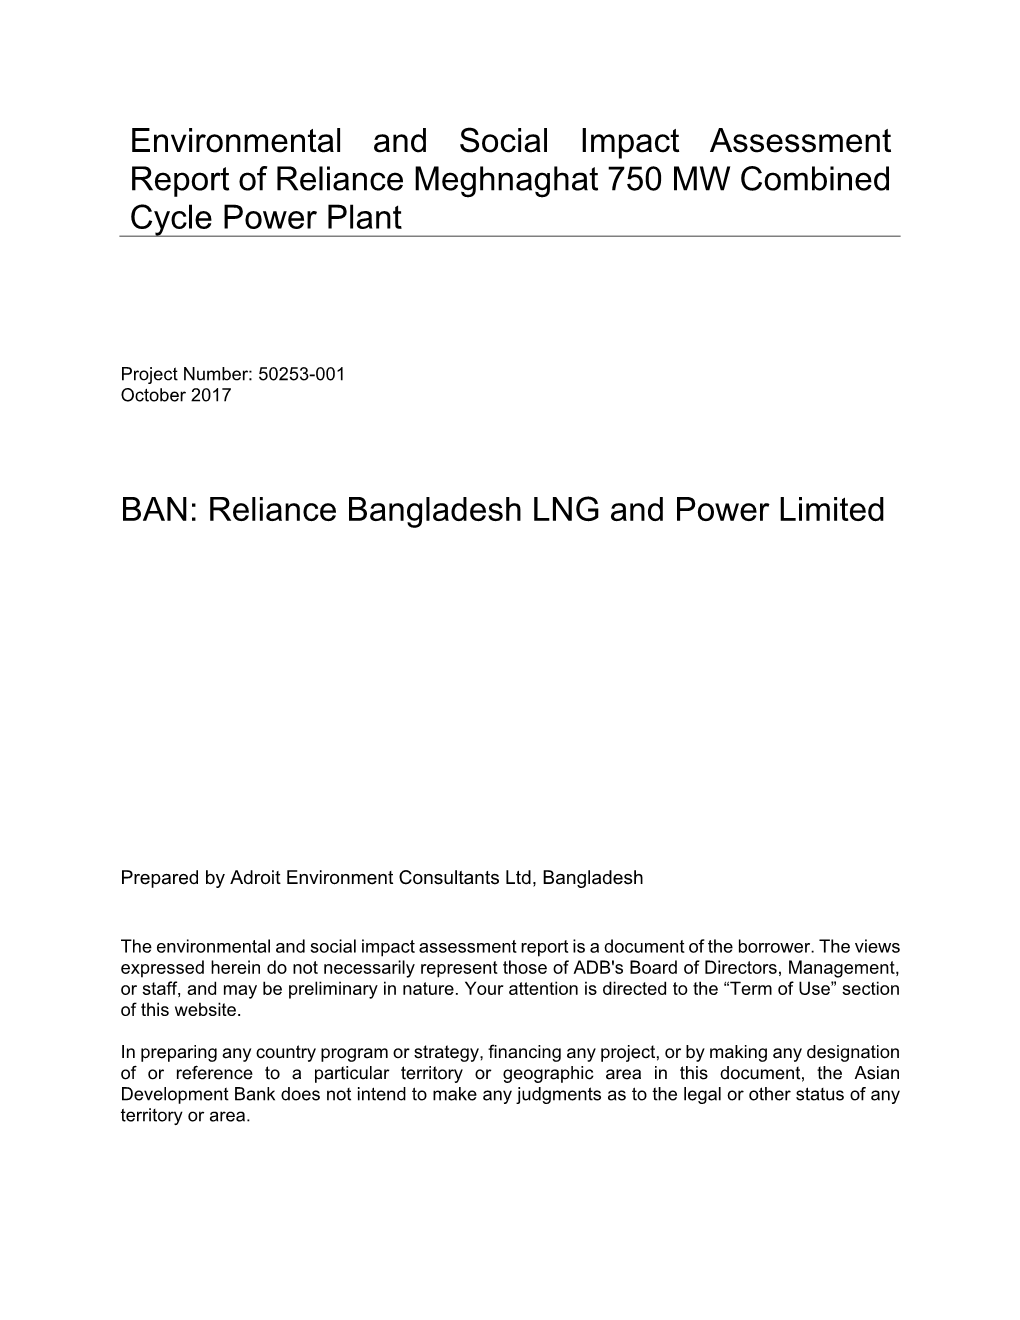 Environmental and Social Impact Assessment Report of Reliance Meghnaghat 750 MW Combined Cycle Power Plant